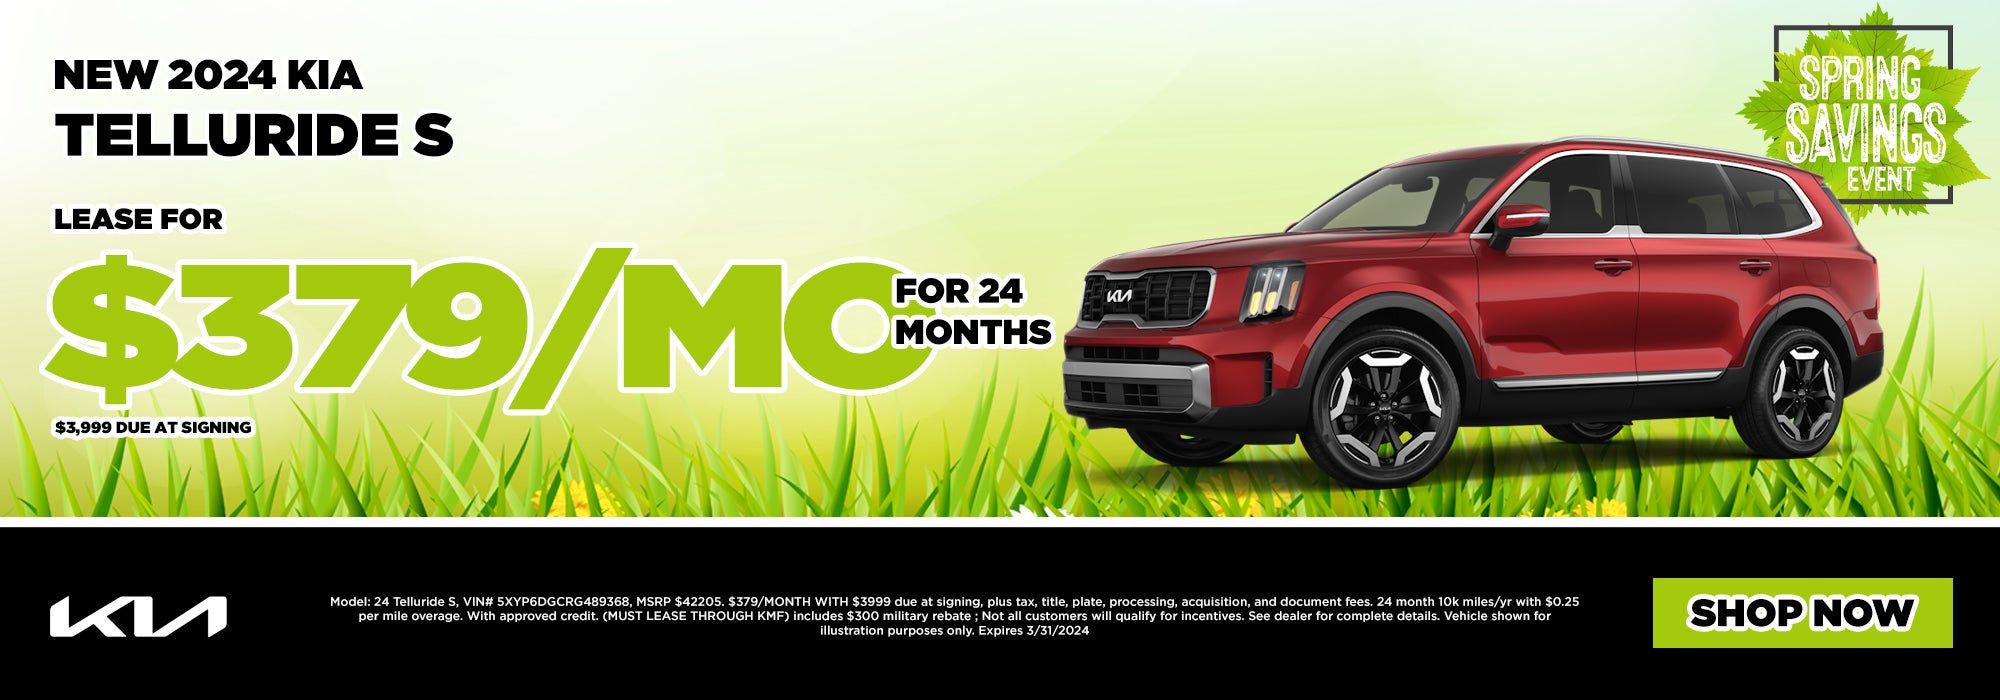 Lease For $379/Mo For 24 Months 2024 Kia Telluride S